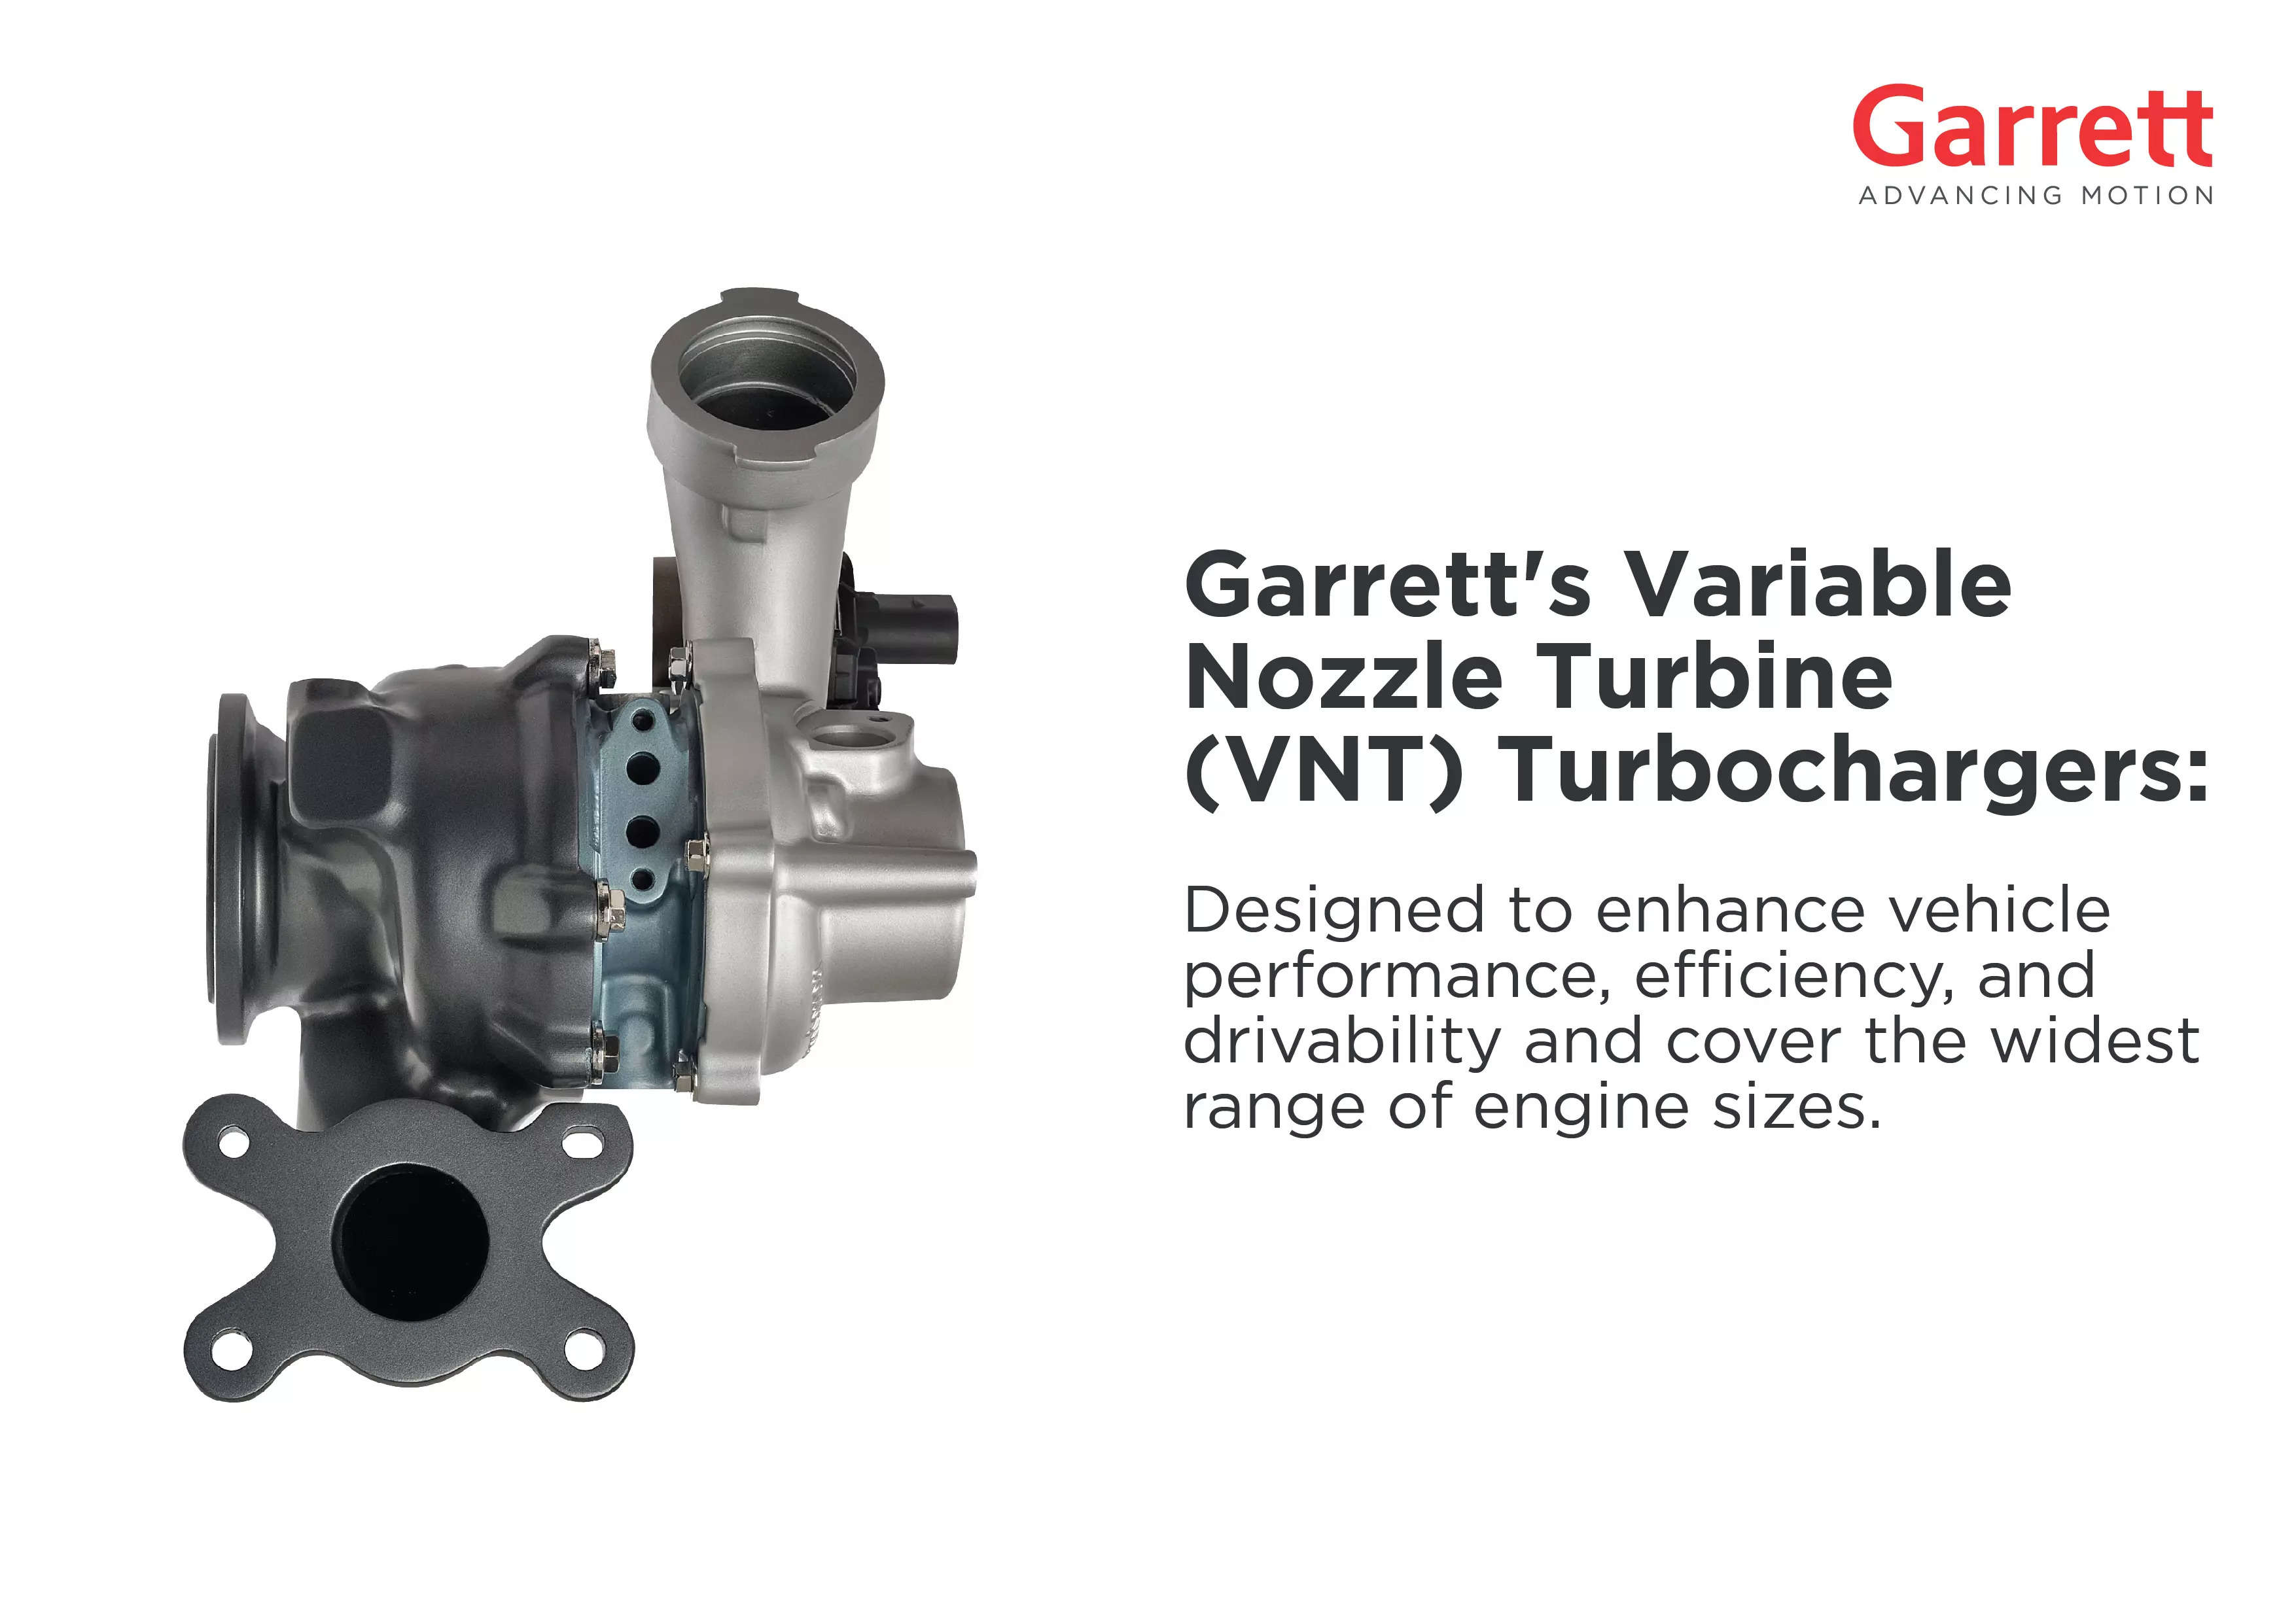  Garrett also offers differentiated technologies for the growing connected vehicle market, including predictive maintenance and diagnostics, cybersecurity, and advanced control software tools.